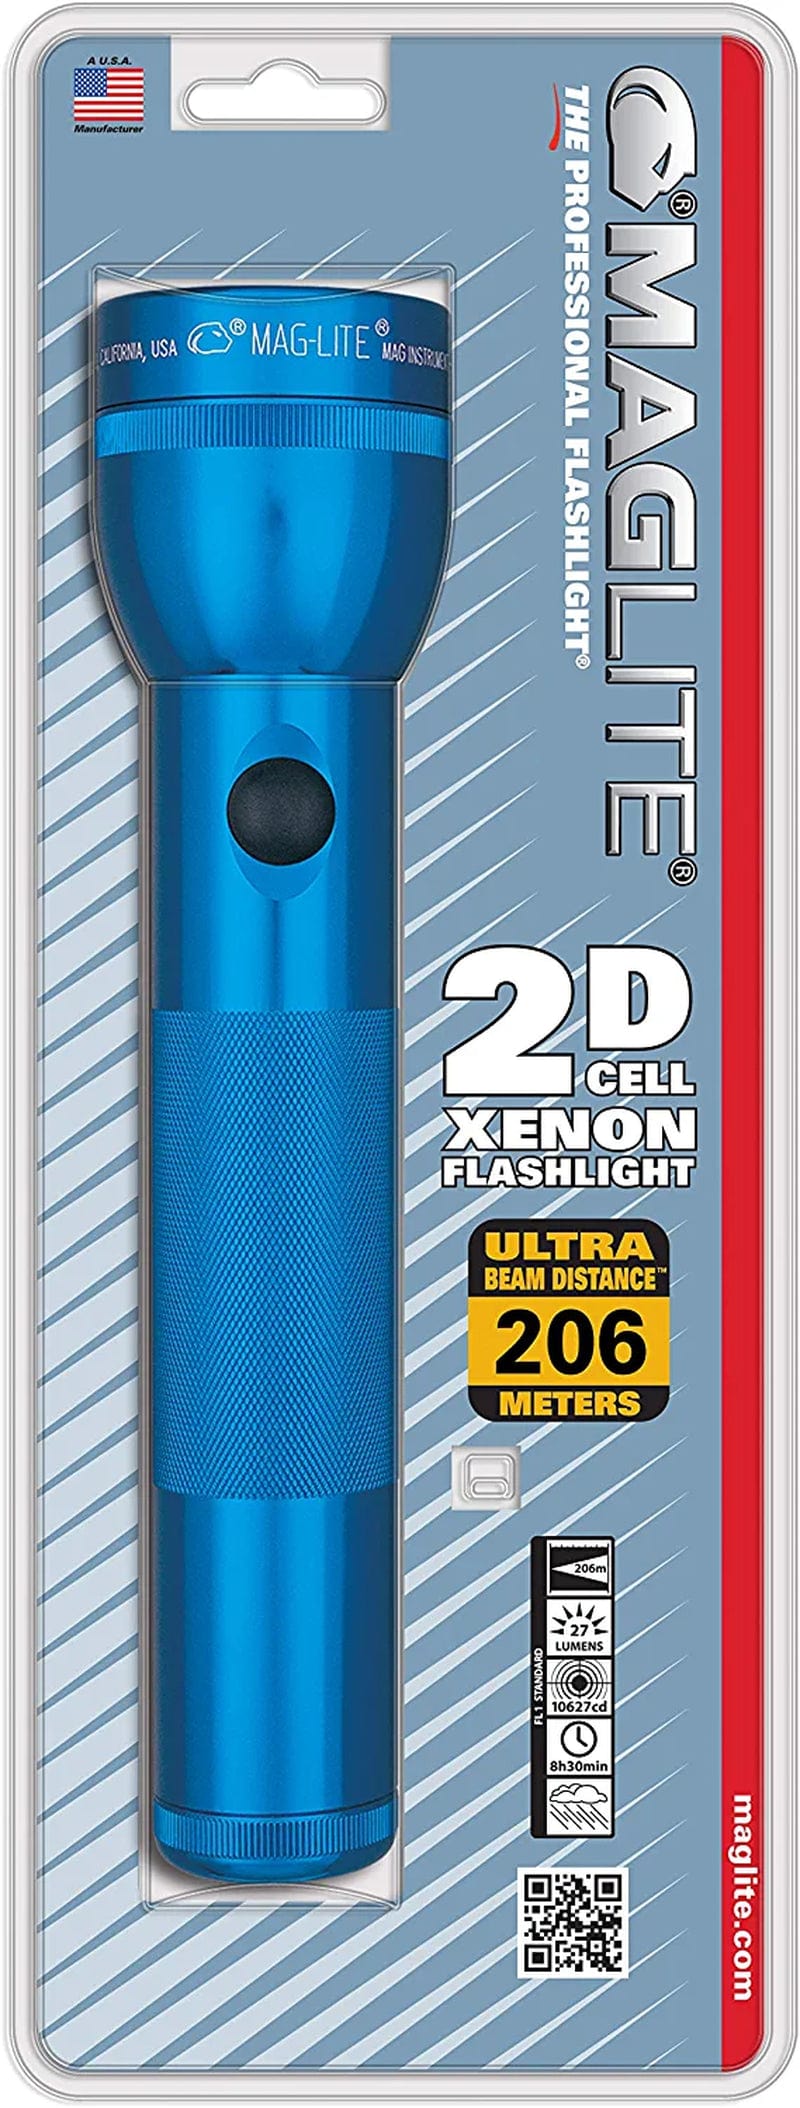 Maglite Heavy-Duty Incandescent 3-Cell D Flashlight in Display Box, Blue -S3D115 Hardware > Tools > Flashlights & Headlamps > Flashlights MAGLITE Blue Classic 2 Cell in Blister Pack